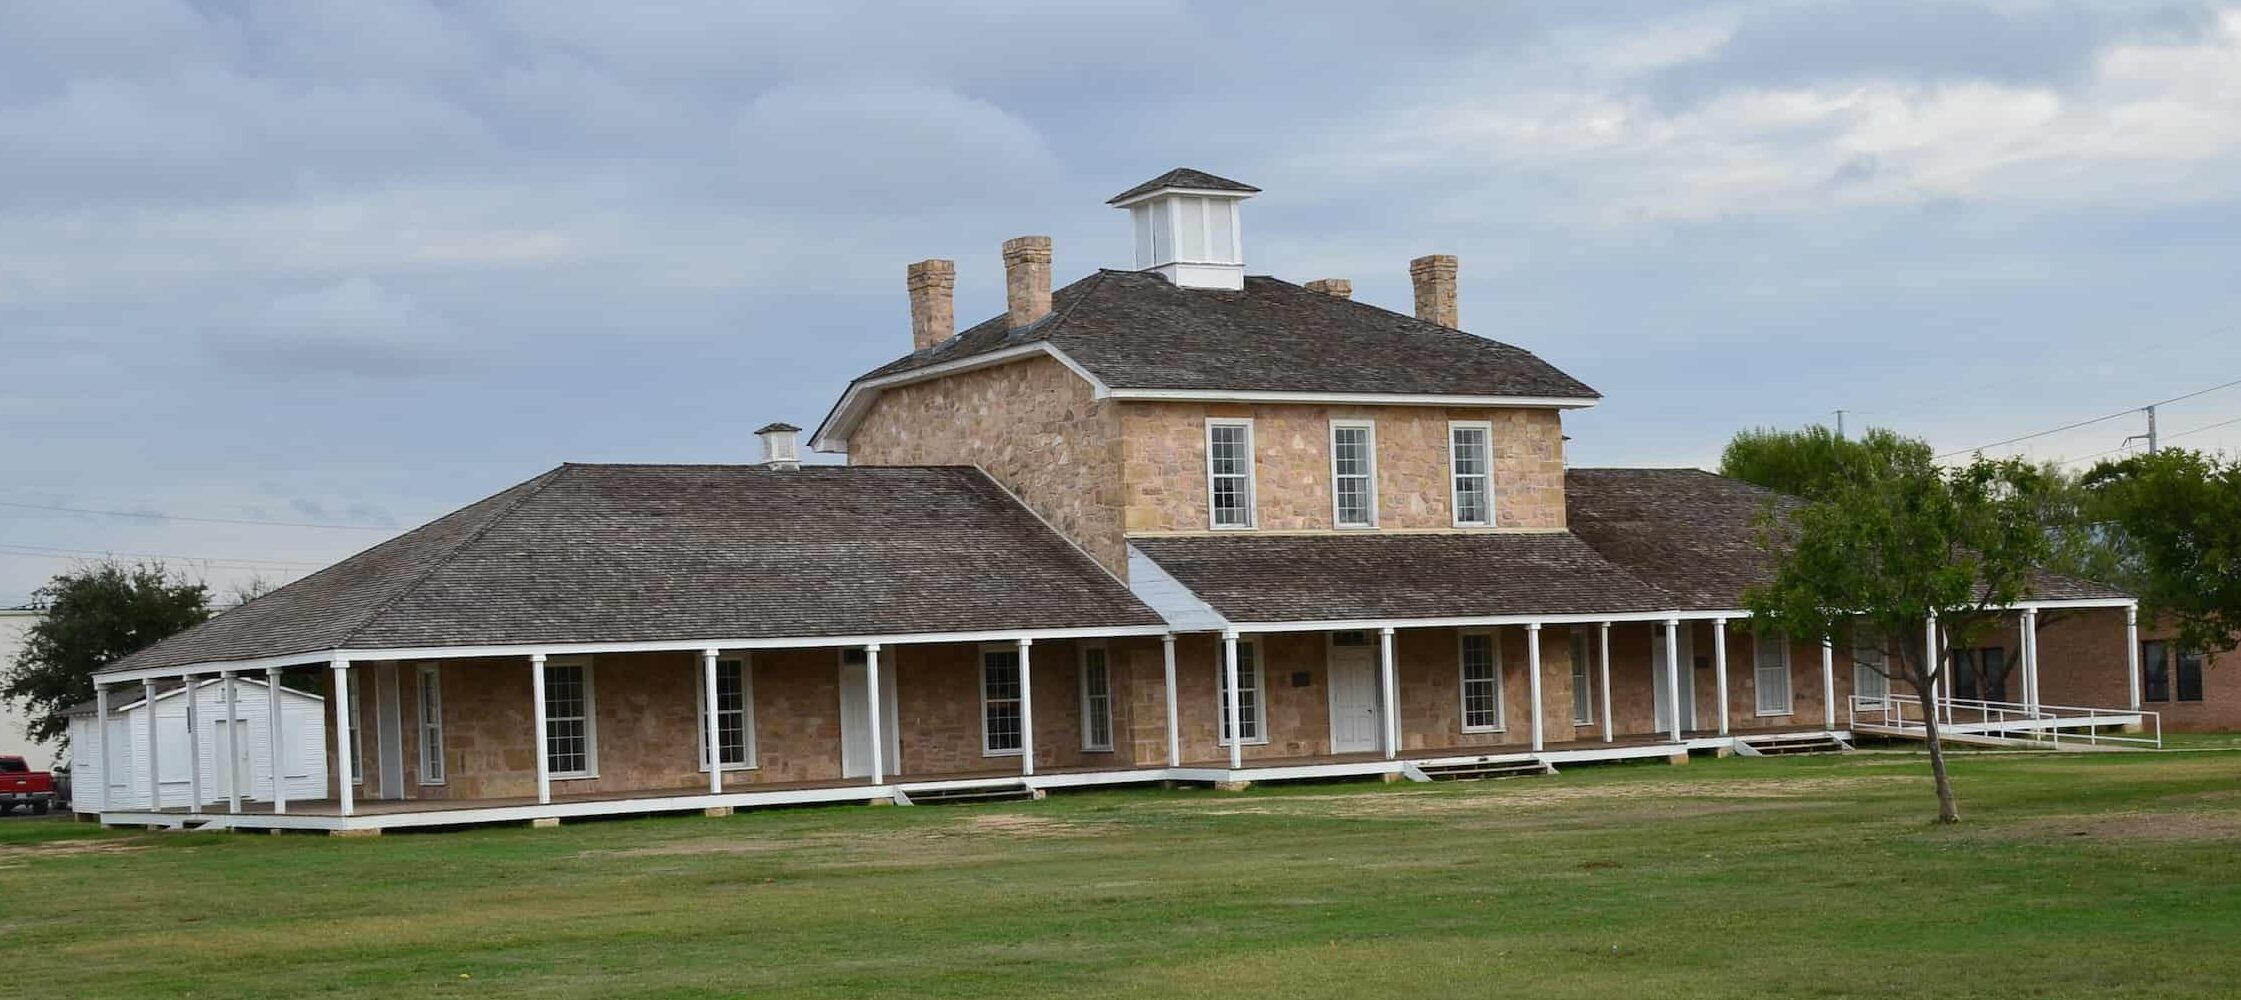 Post Hospital at Fort Concho in San Angelo, Texas